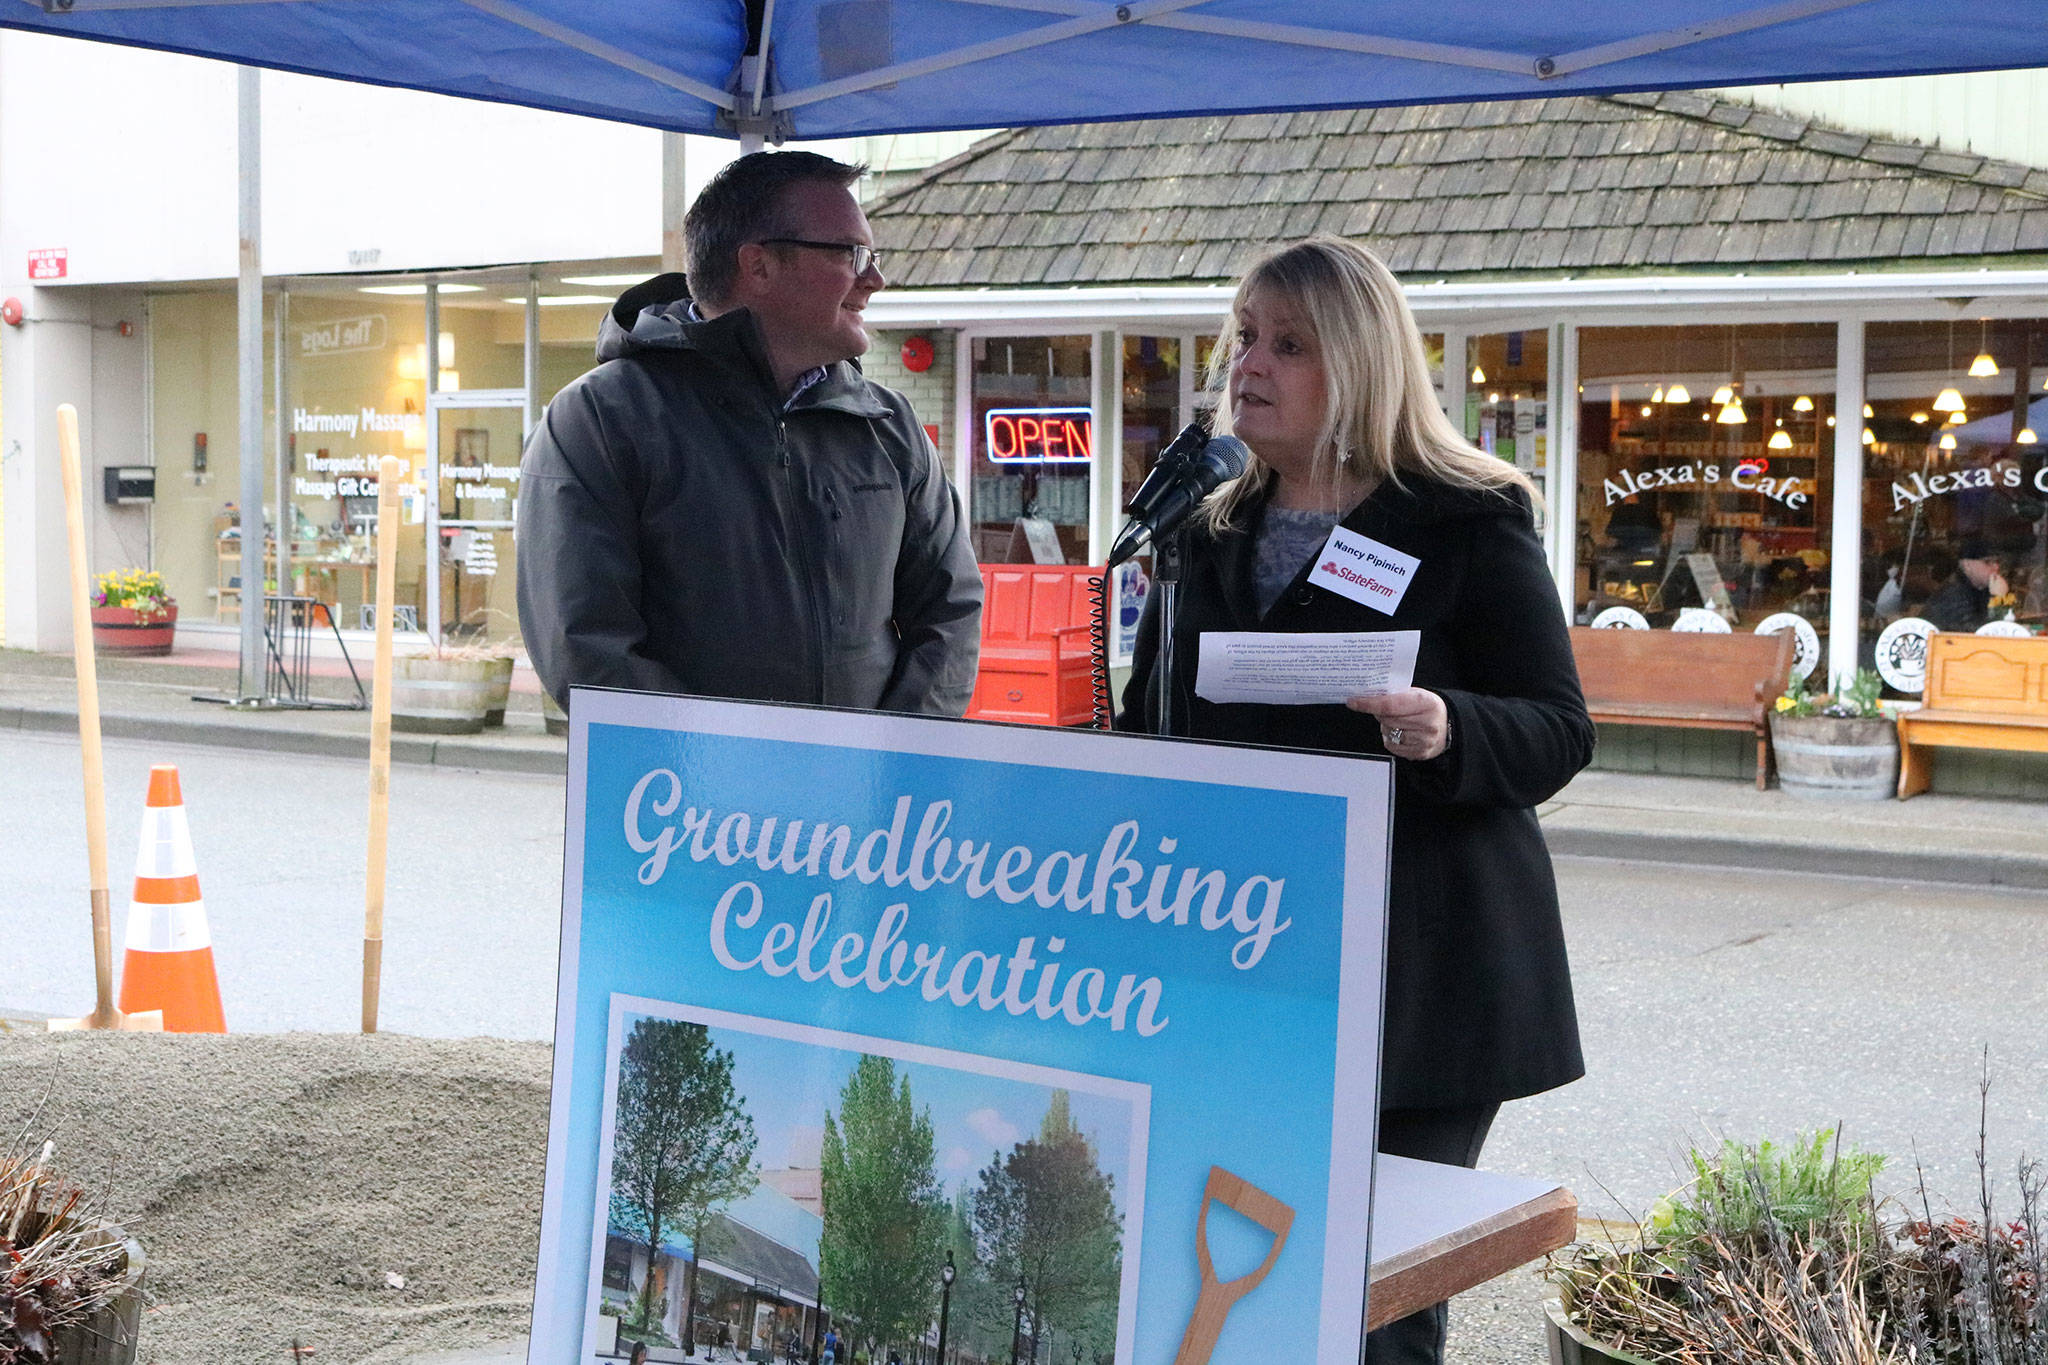 Bothell Mayor Andy Rheaume looks on as State Farm owner Nancy Pipinich speaks during the groundbreaking ceremony for the Main Street Enhancement Project on March 28. CATHERINE KRUMMEY / Bothell Reporter